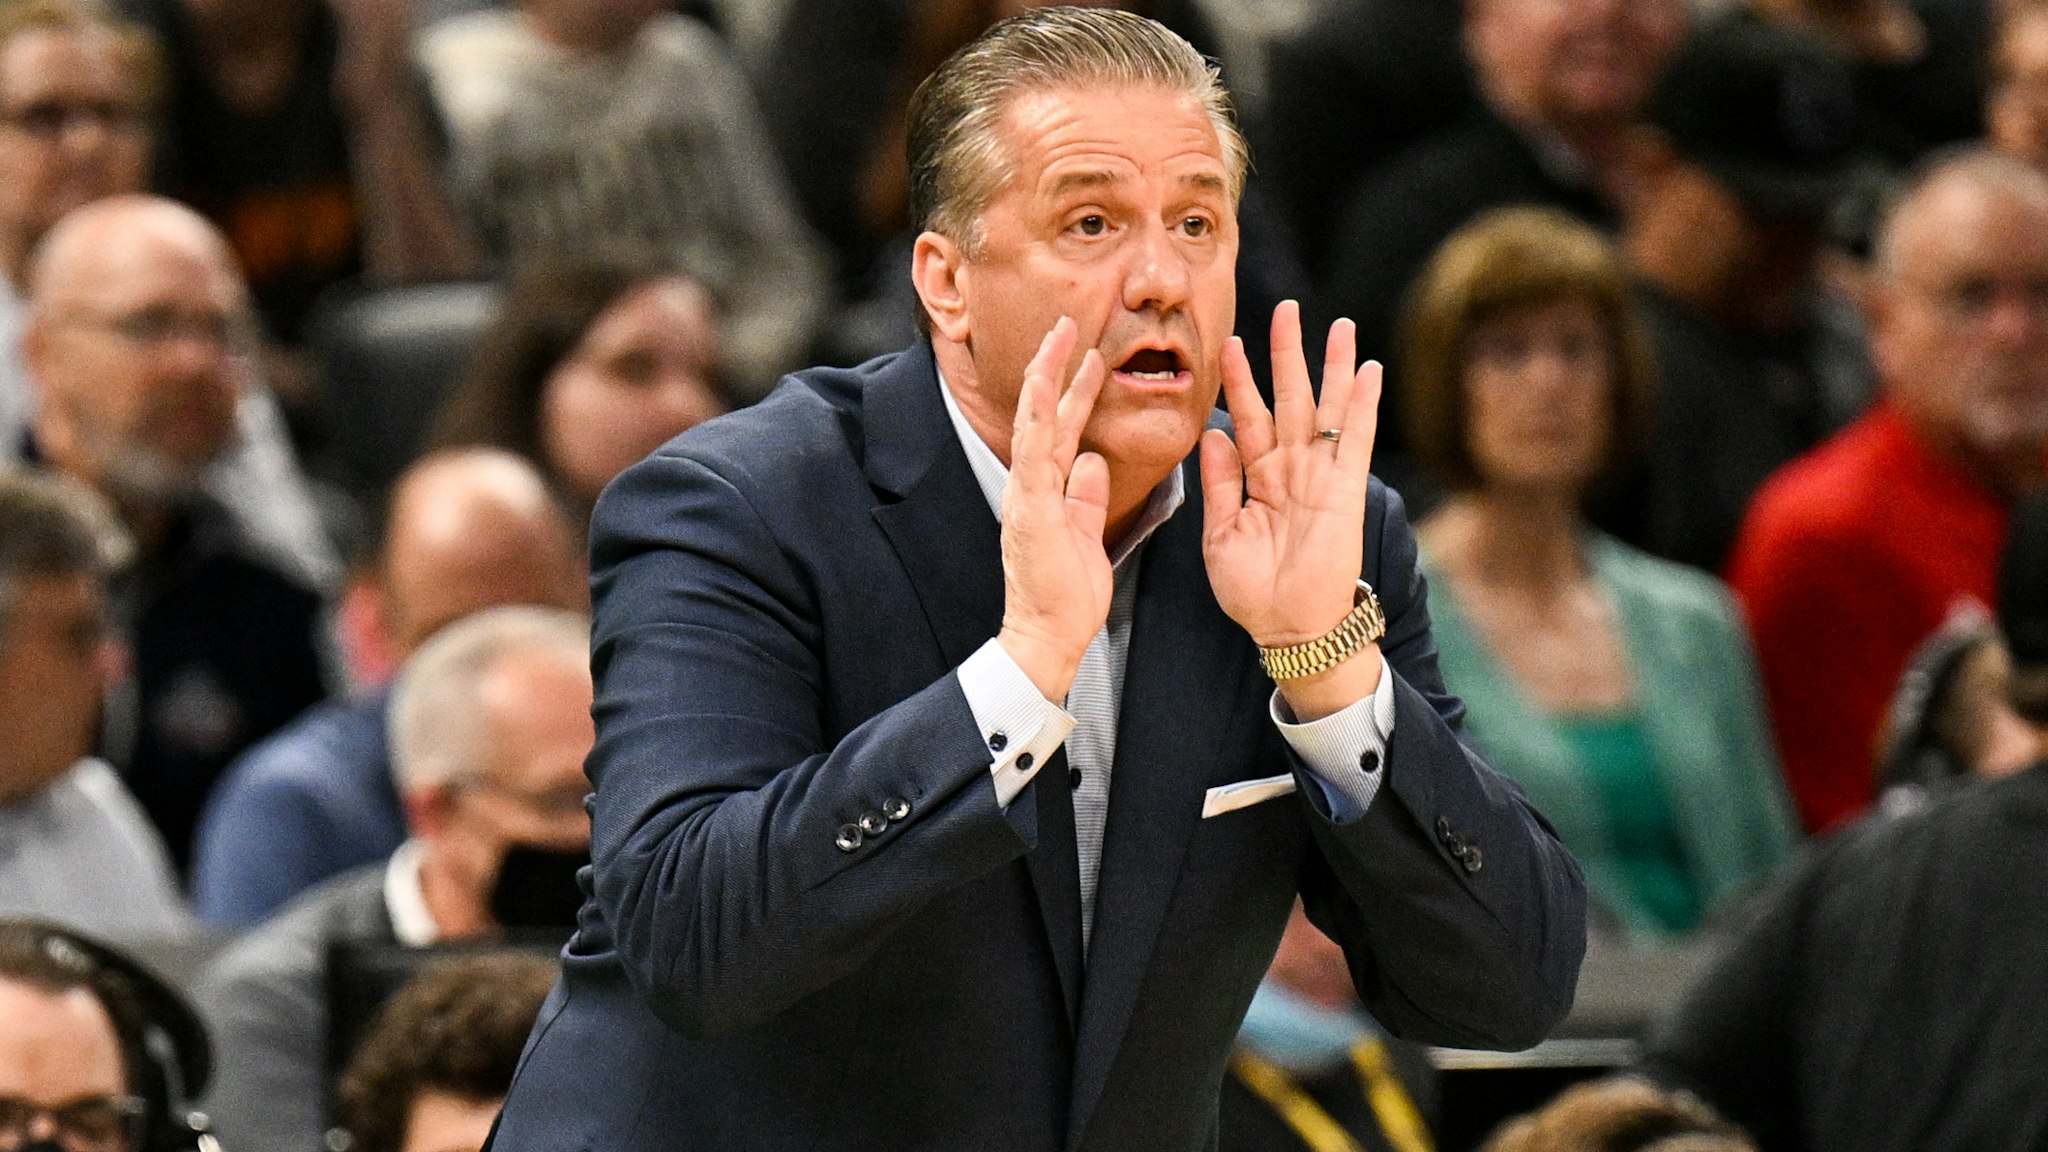 Head coach John Calipari of the Kentucky Wildcats coaches from the sideline against the St. Peter's Peacocks in the first round of the 2022 NCAA Men's Basketball Tournament held at Gainbridge Fieldhouse on March 17, 2022 in Indianapolis, Indiana